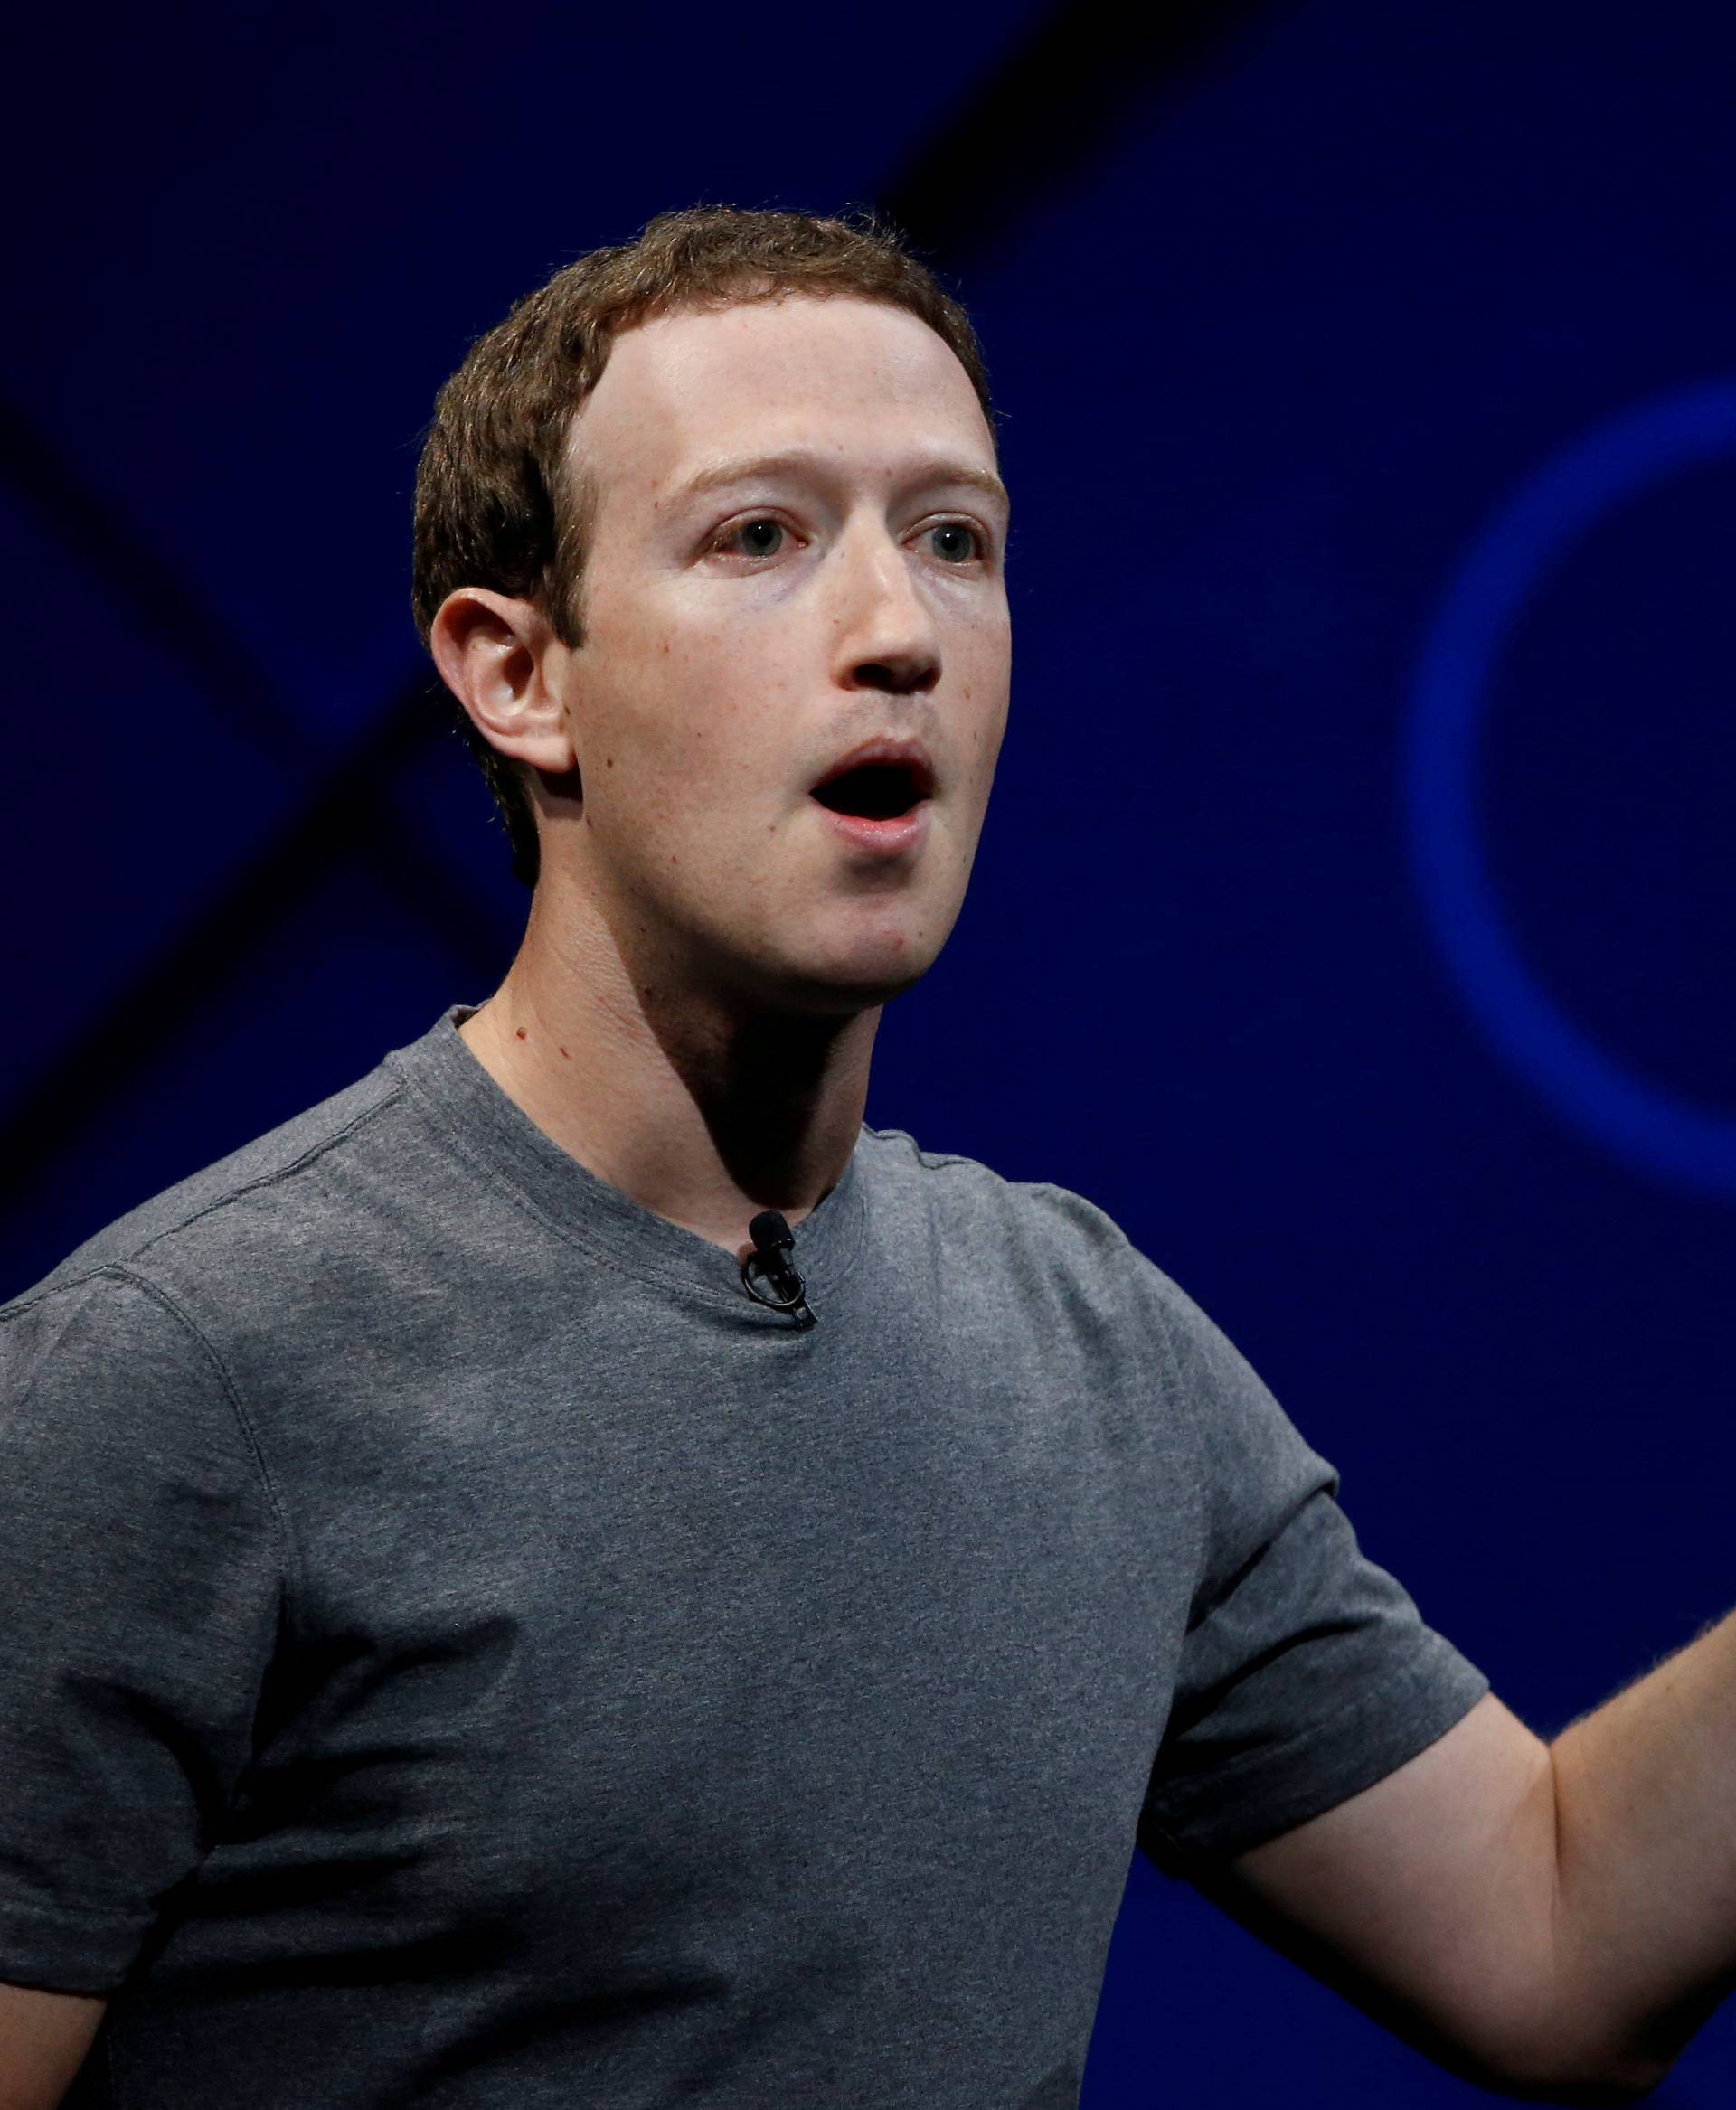 FILE PHOTO: Facebook Founder and CEO Mark Zuckerberg speaks on stage in San Jose